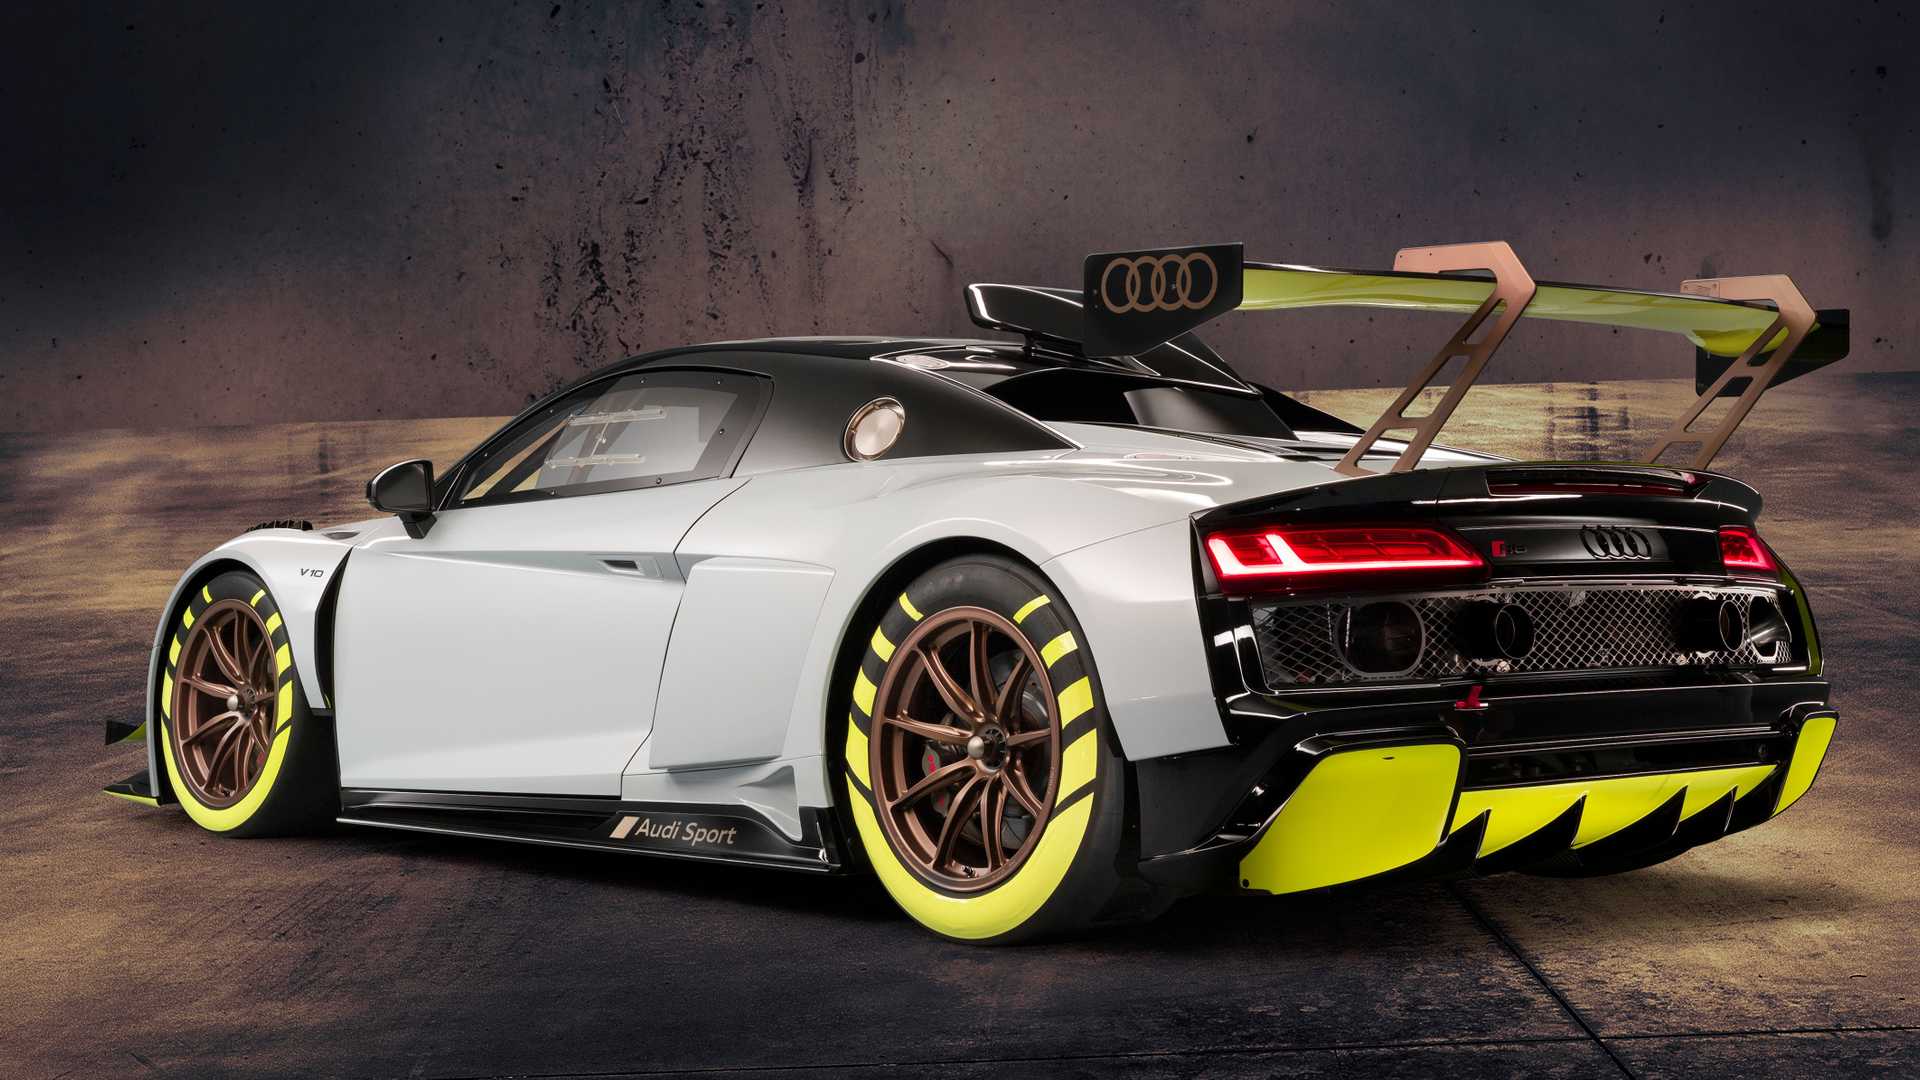 Audi R8 Lms Gt2 Is A Wild Race Car With Hp Update